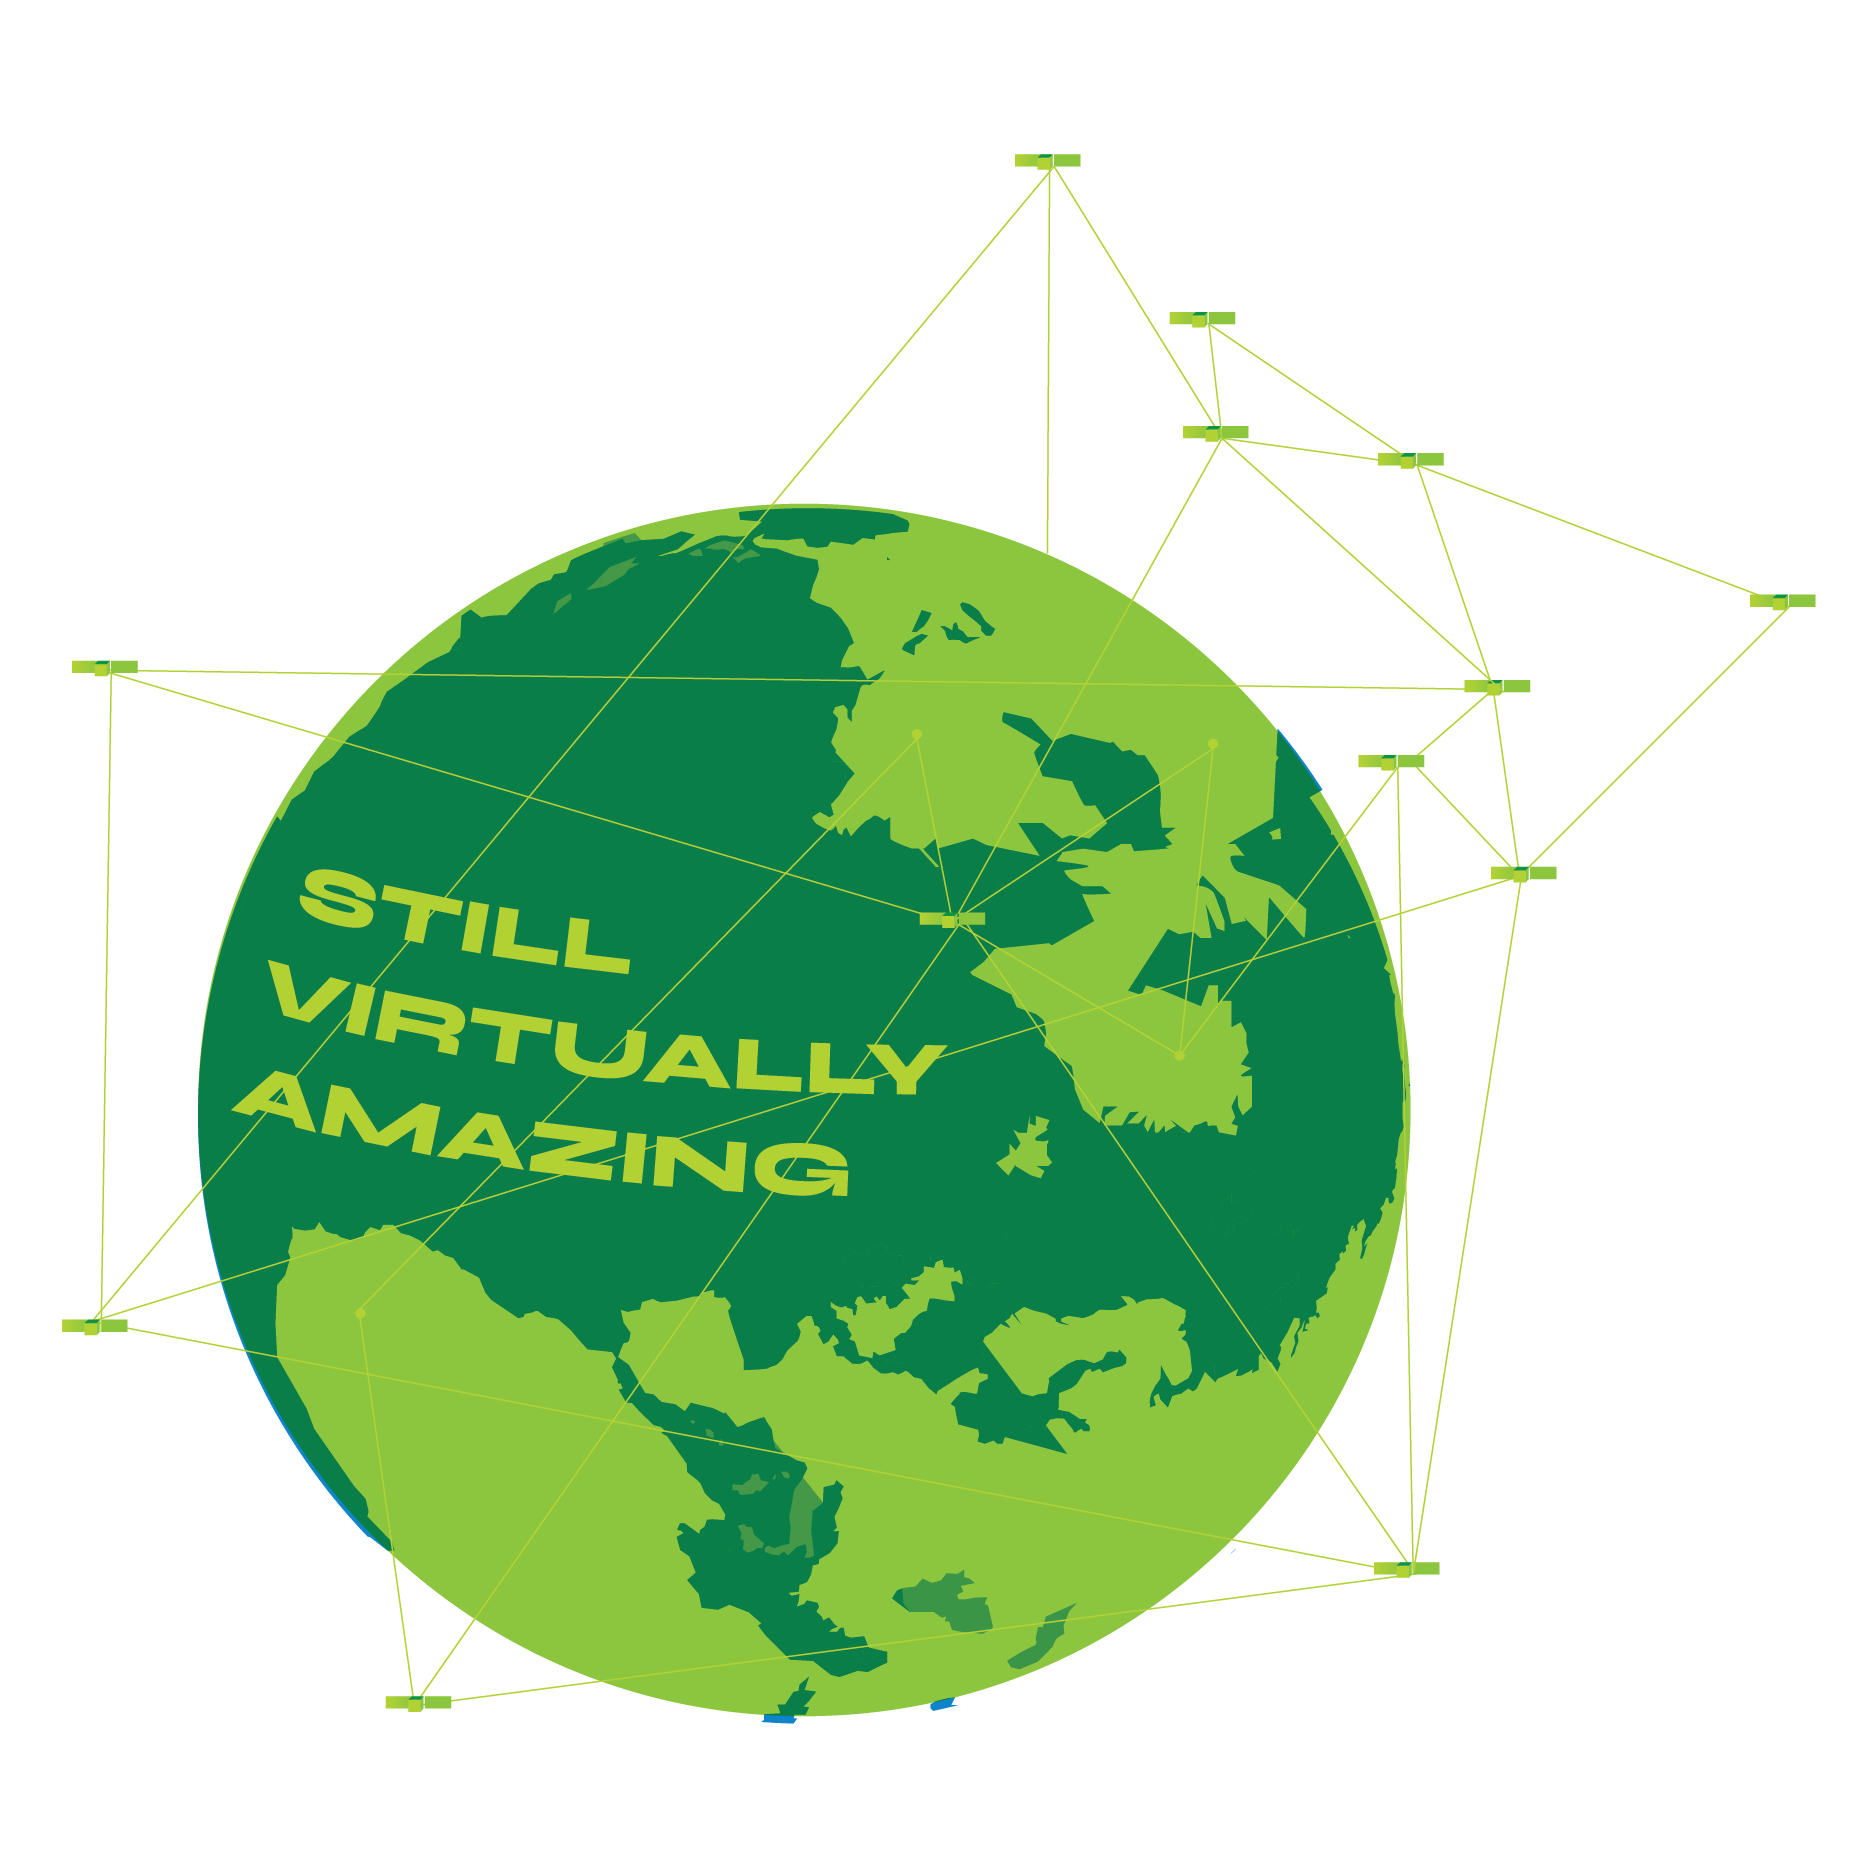 Sparkwing at the Smallsat.org 2021 conference